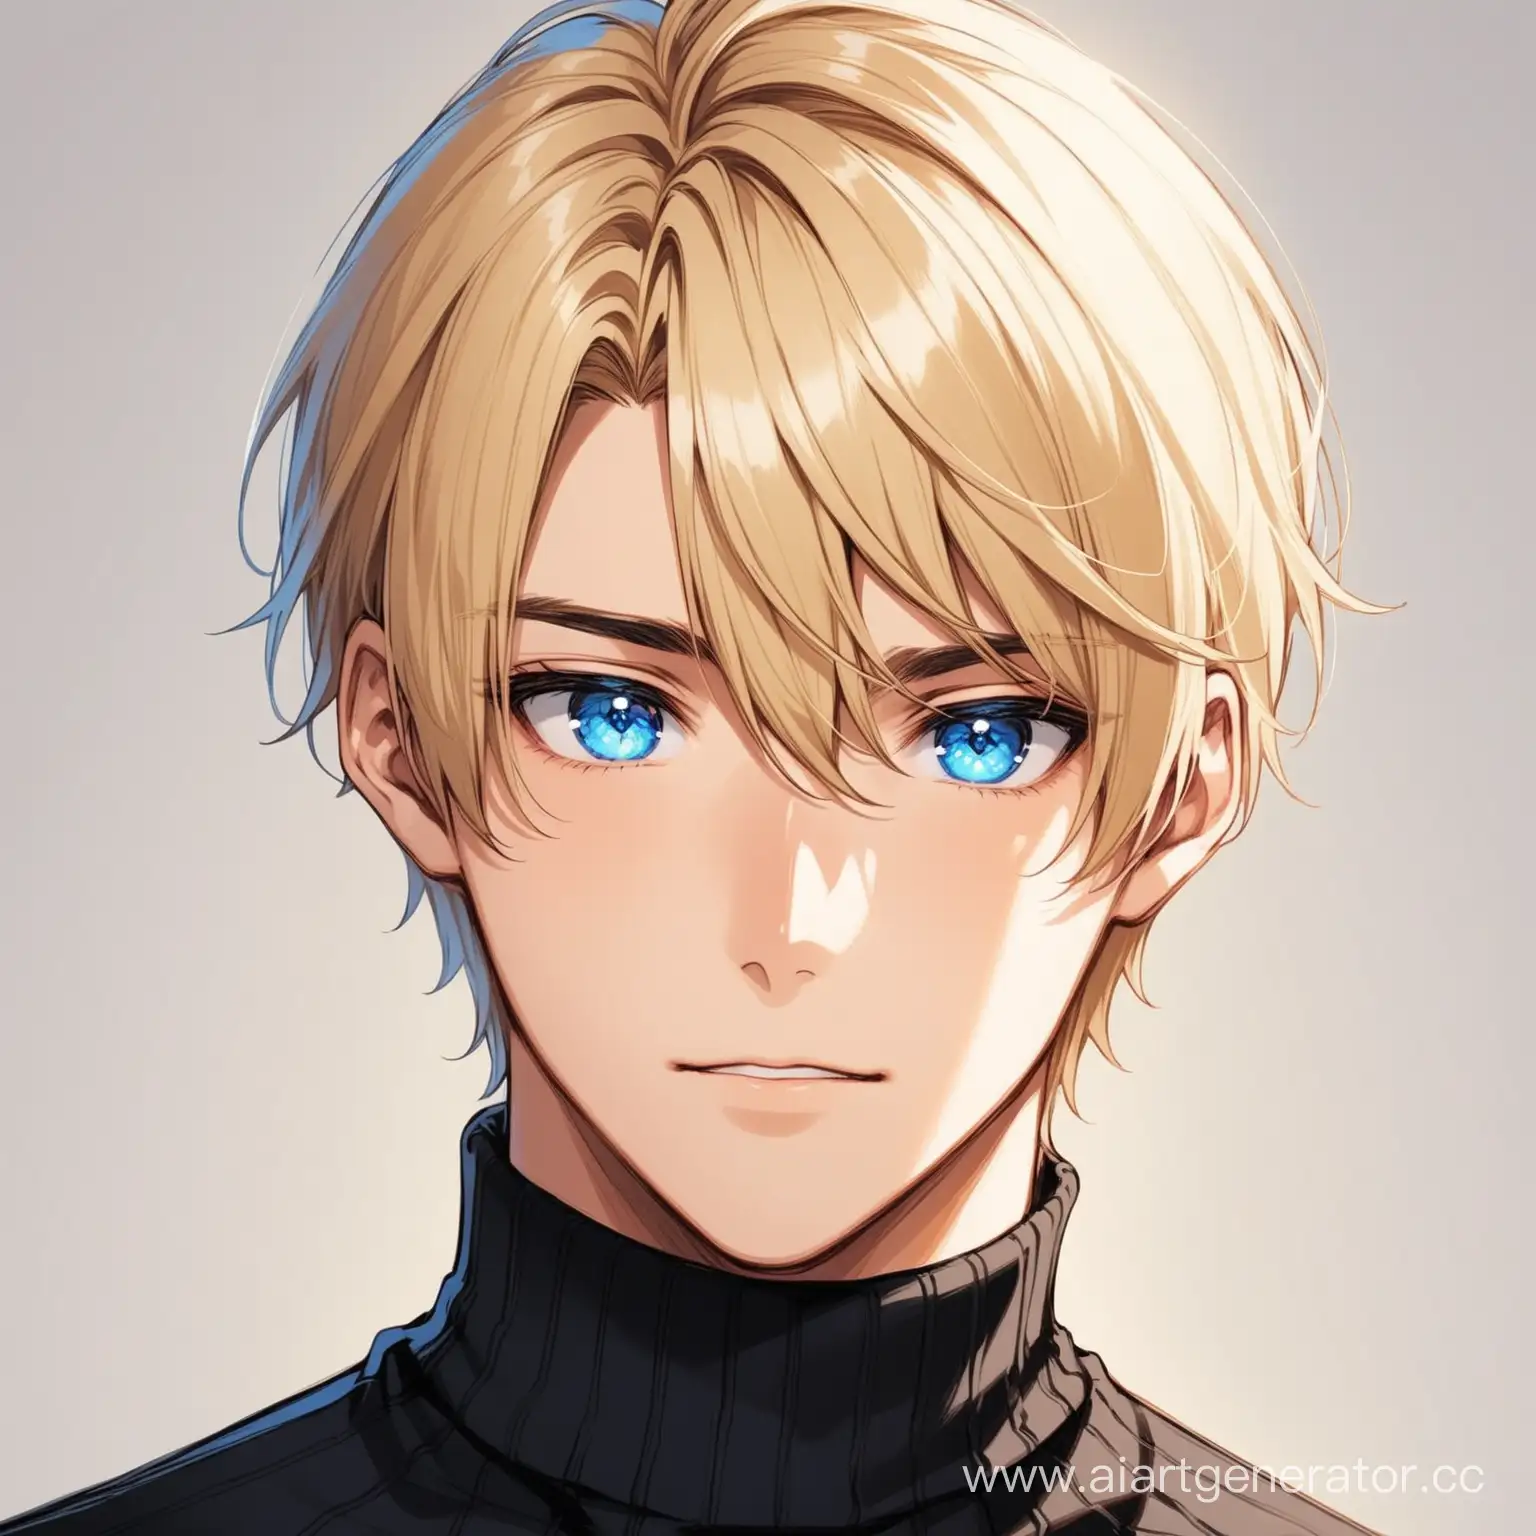 Handsome-Young-Man-with-Blue-Eyes-and-Blond-Hair-in-Stylish-Black-Turtleneck